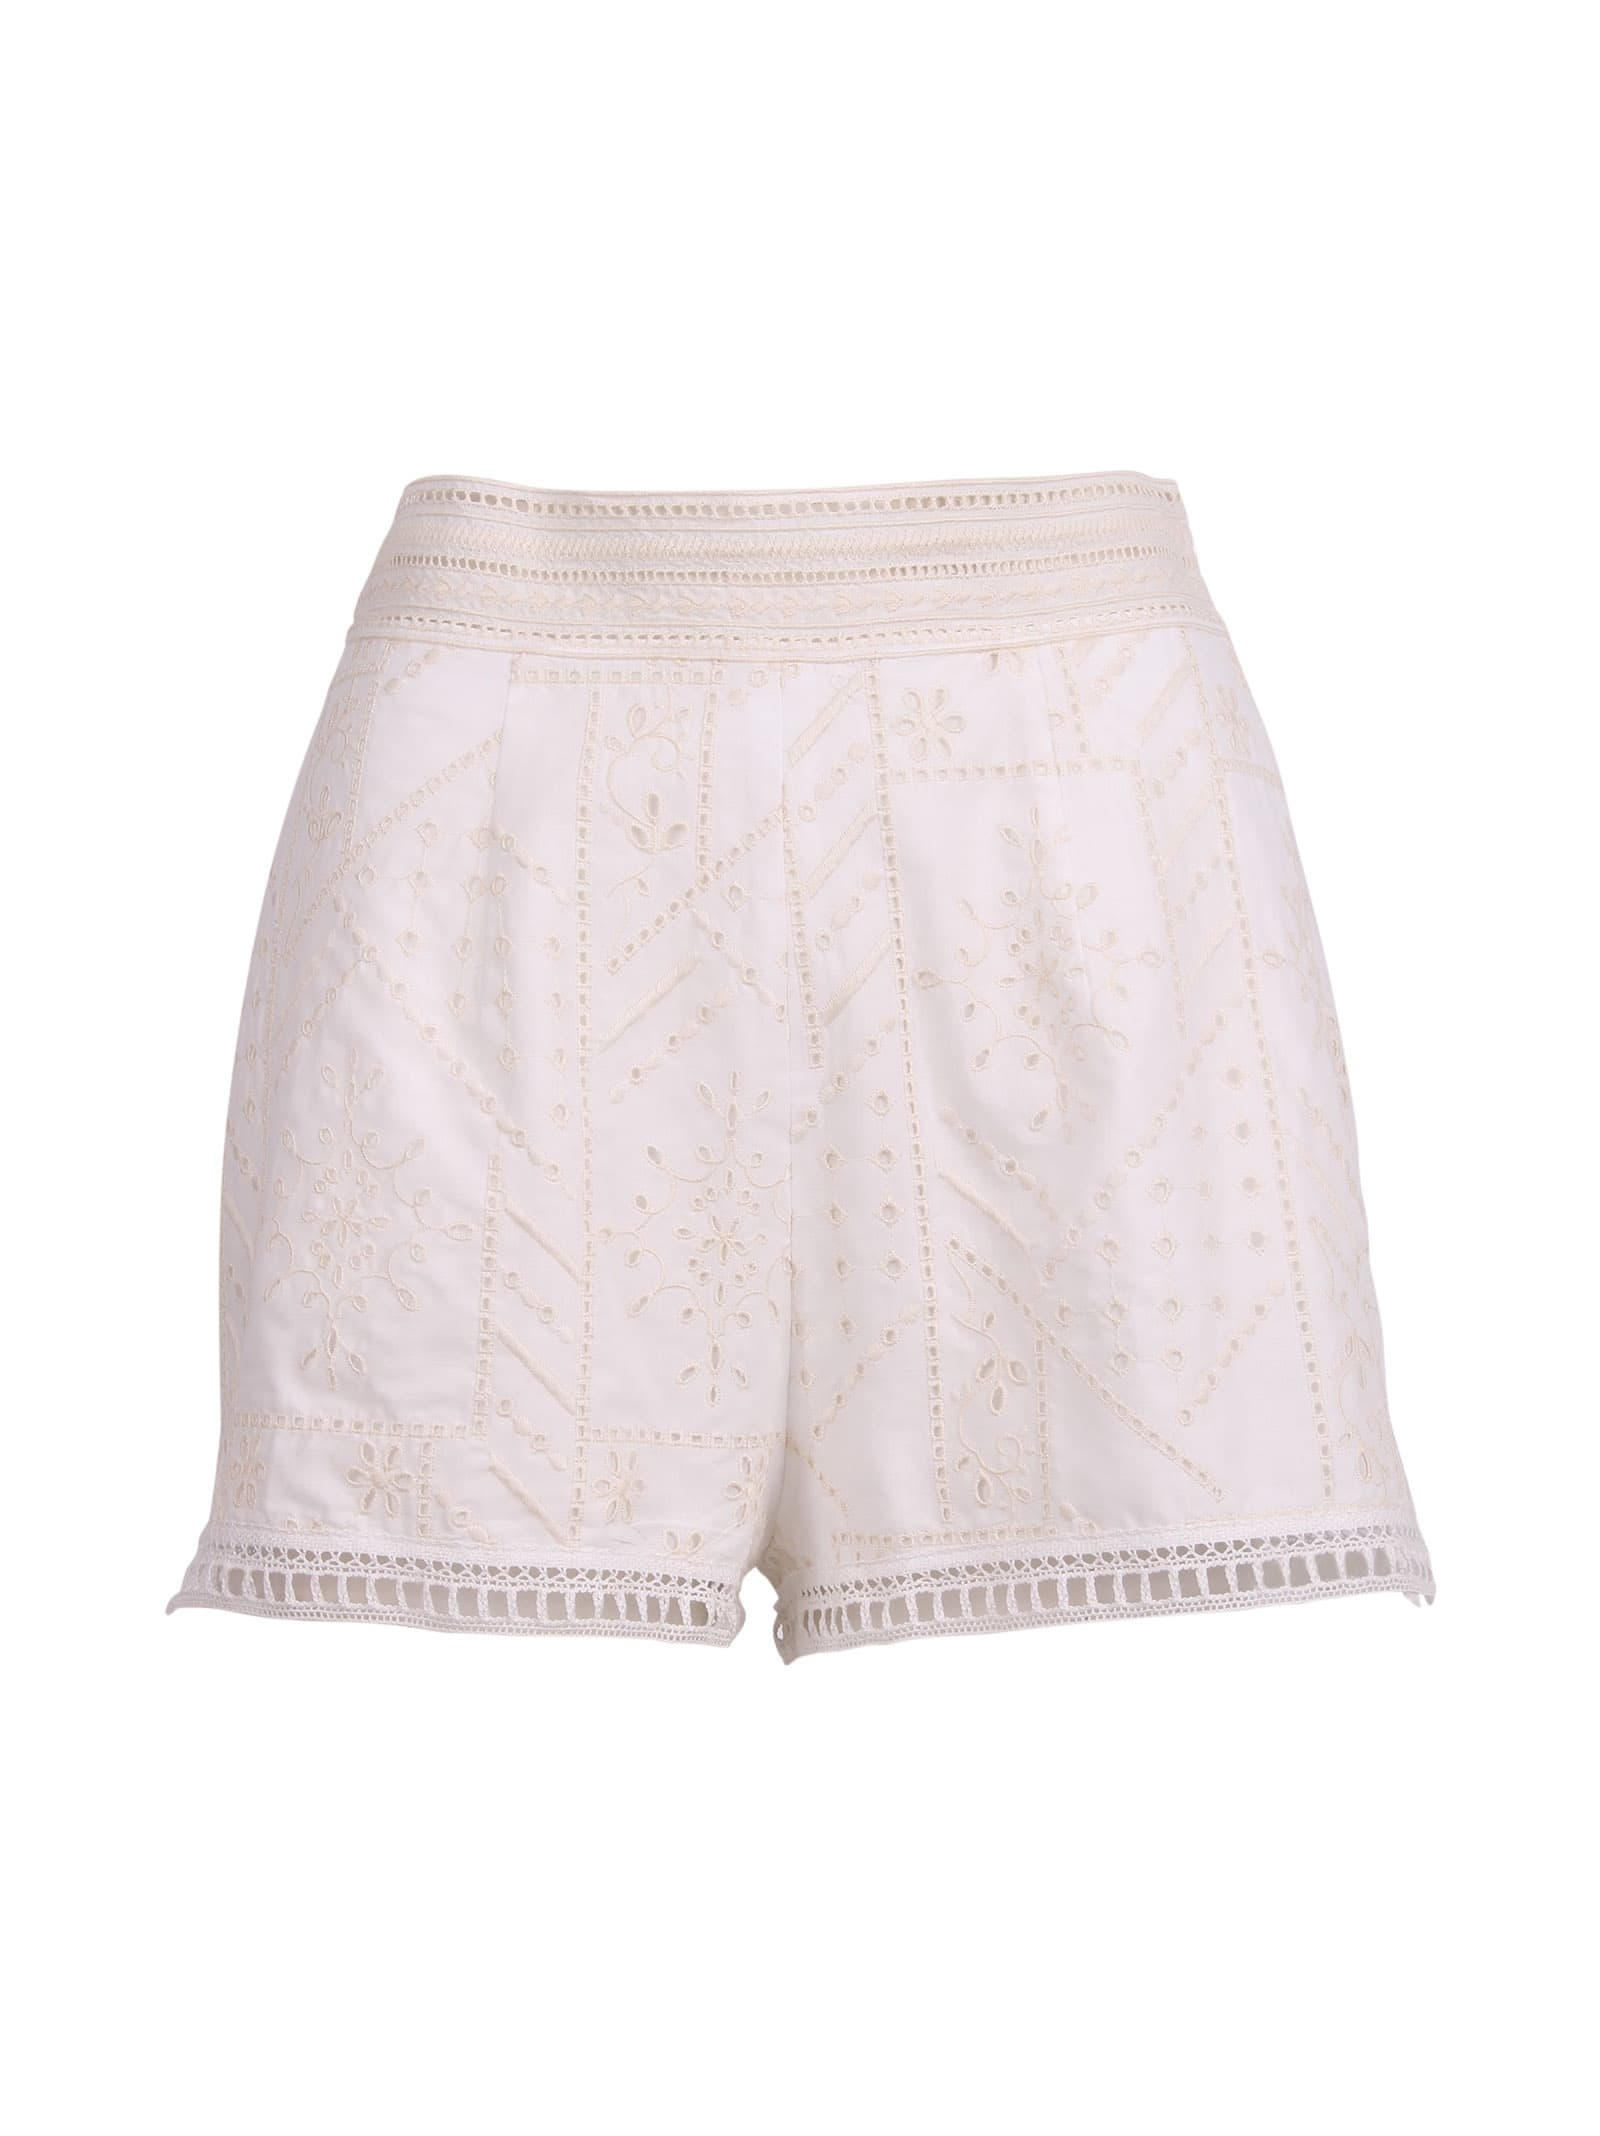 Ermanno Scervino Floral Lace Embroidered Shorts